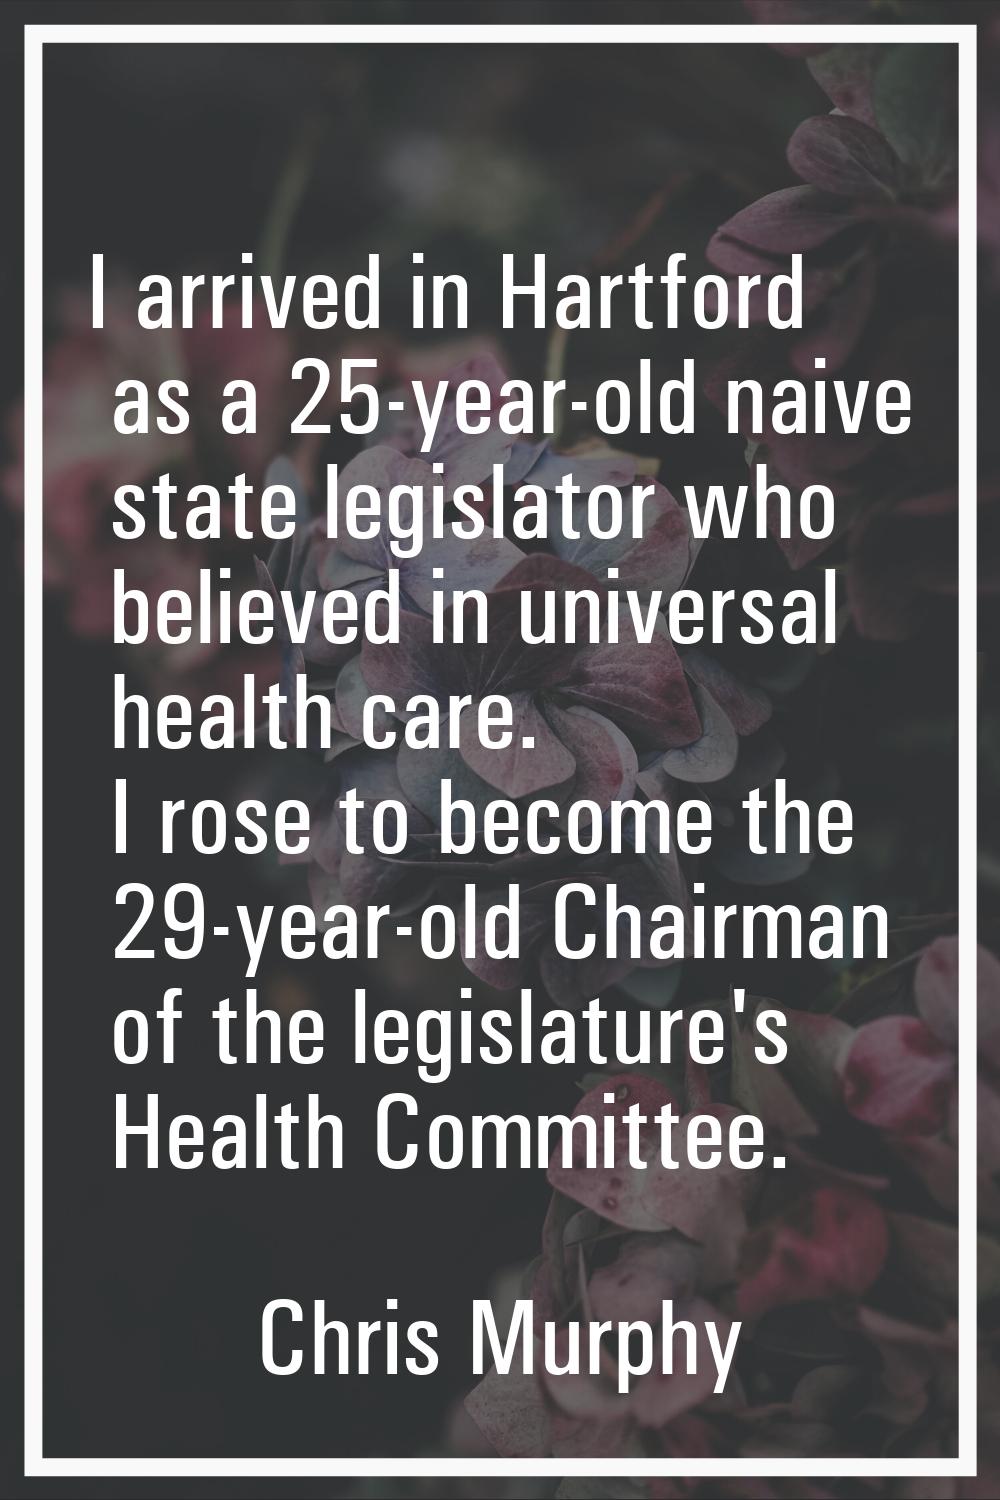 I arrived in Hartford as a 25-year-old naive state legislator who believed in universal health care